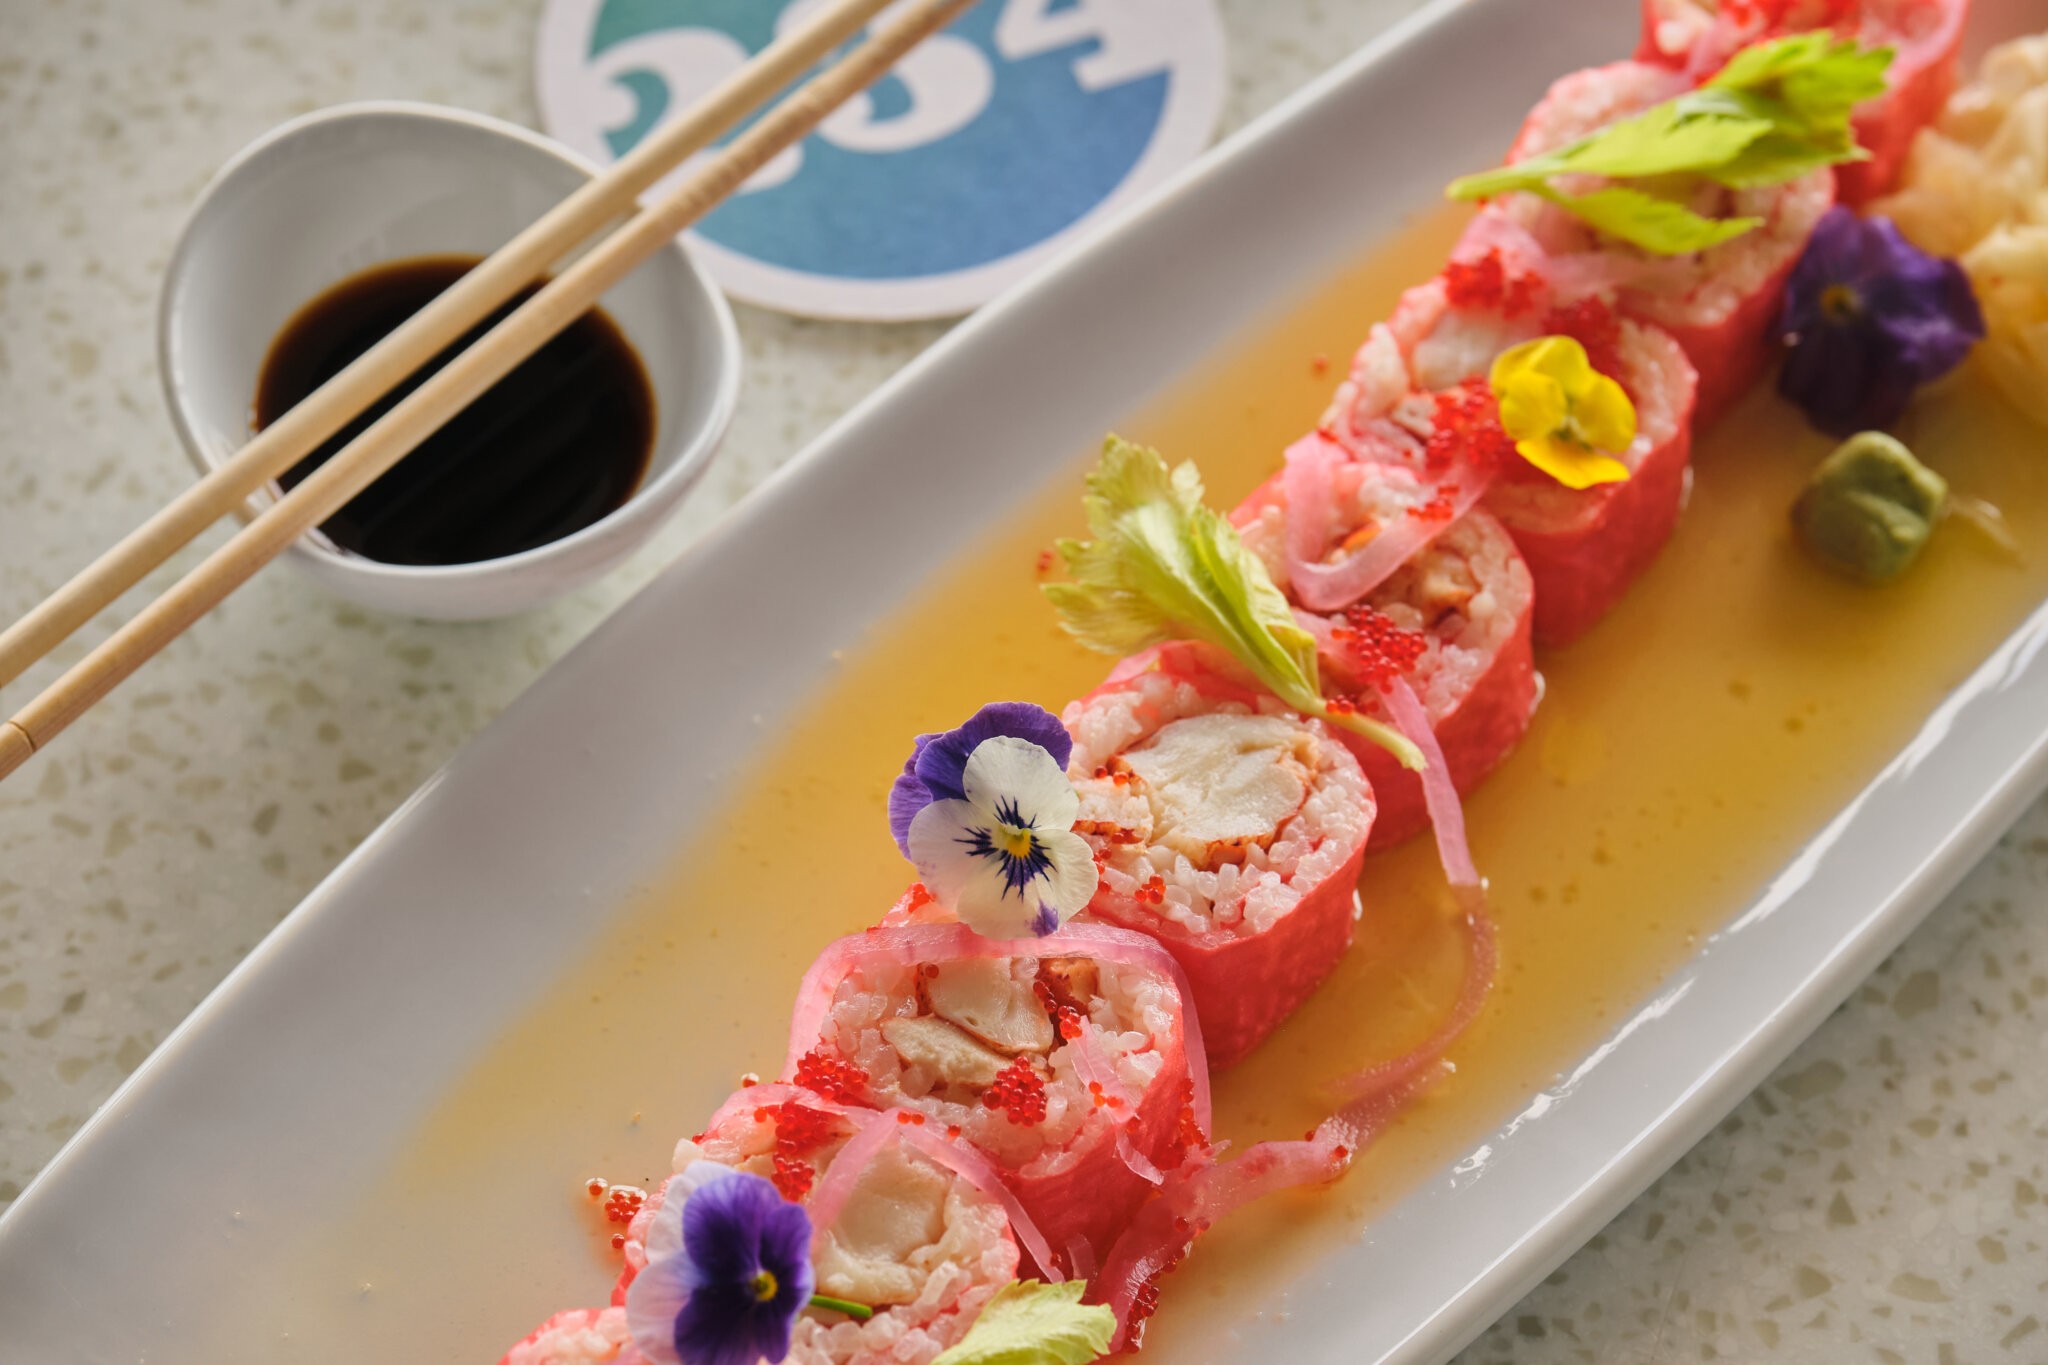 Oceans 234 offers lobster sushi, sliced sashimi and more.